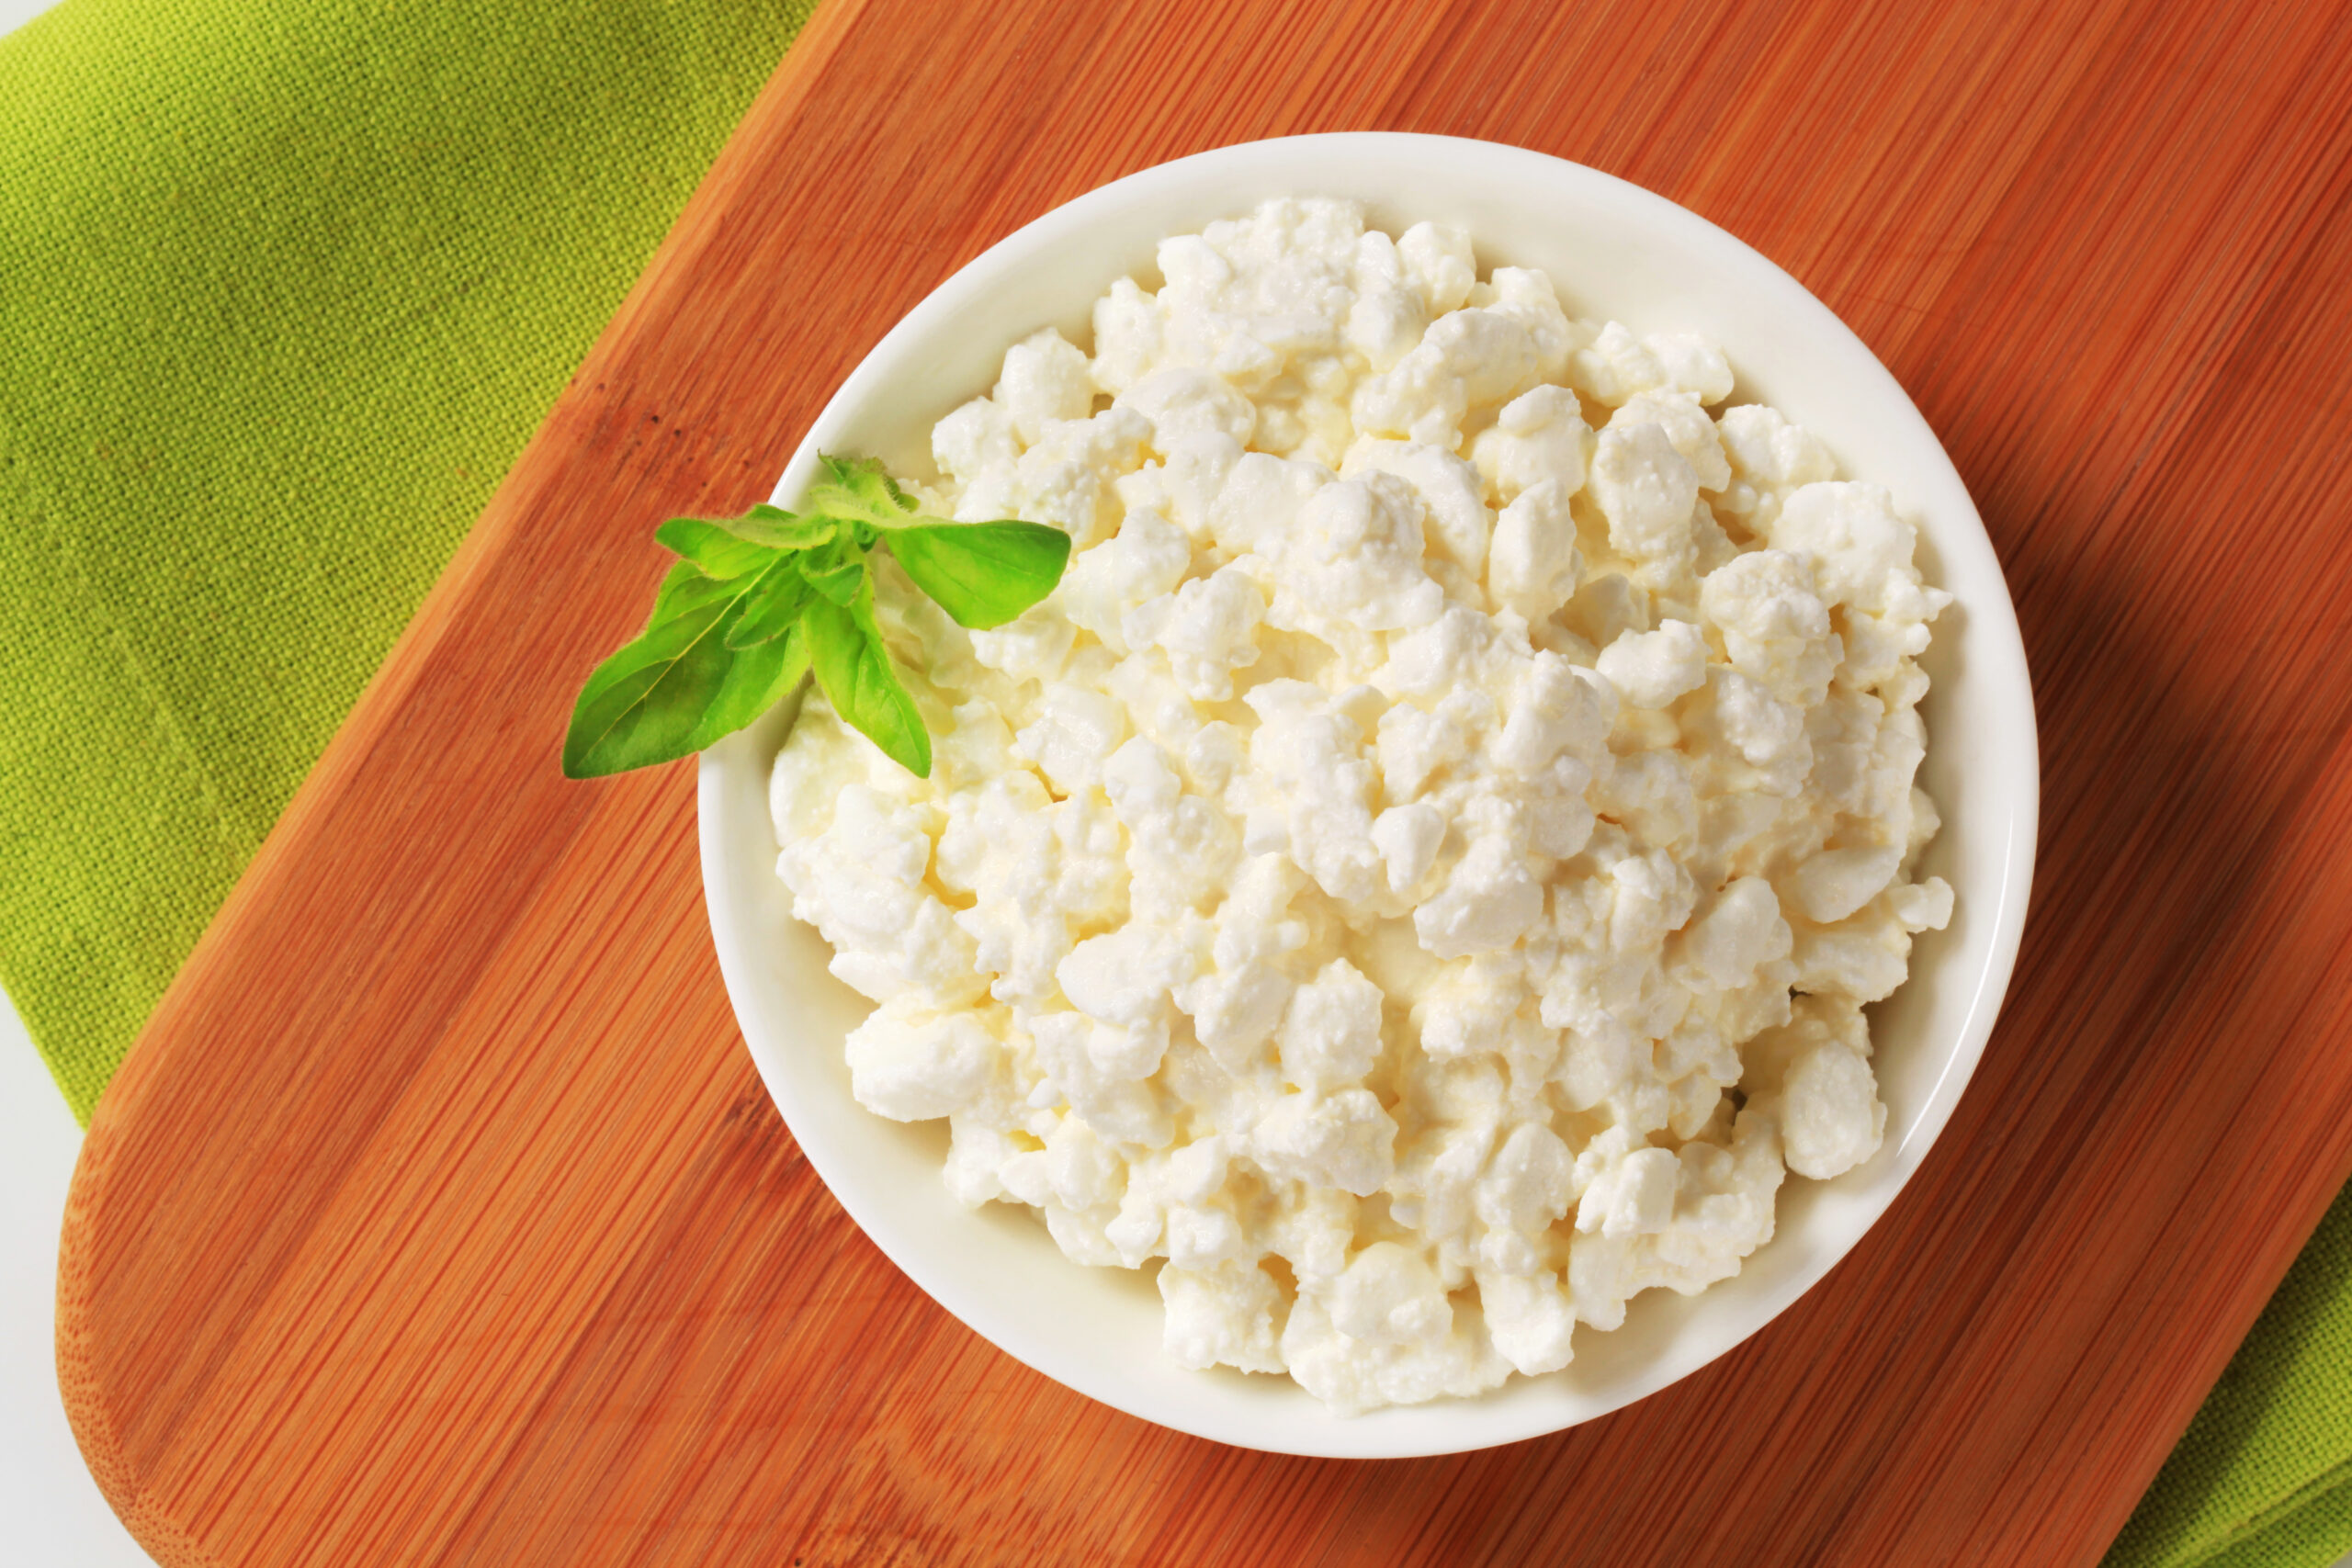 fresh cottage cheese in a small white bowl on a wooden cutting board